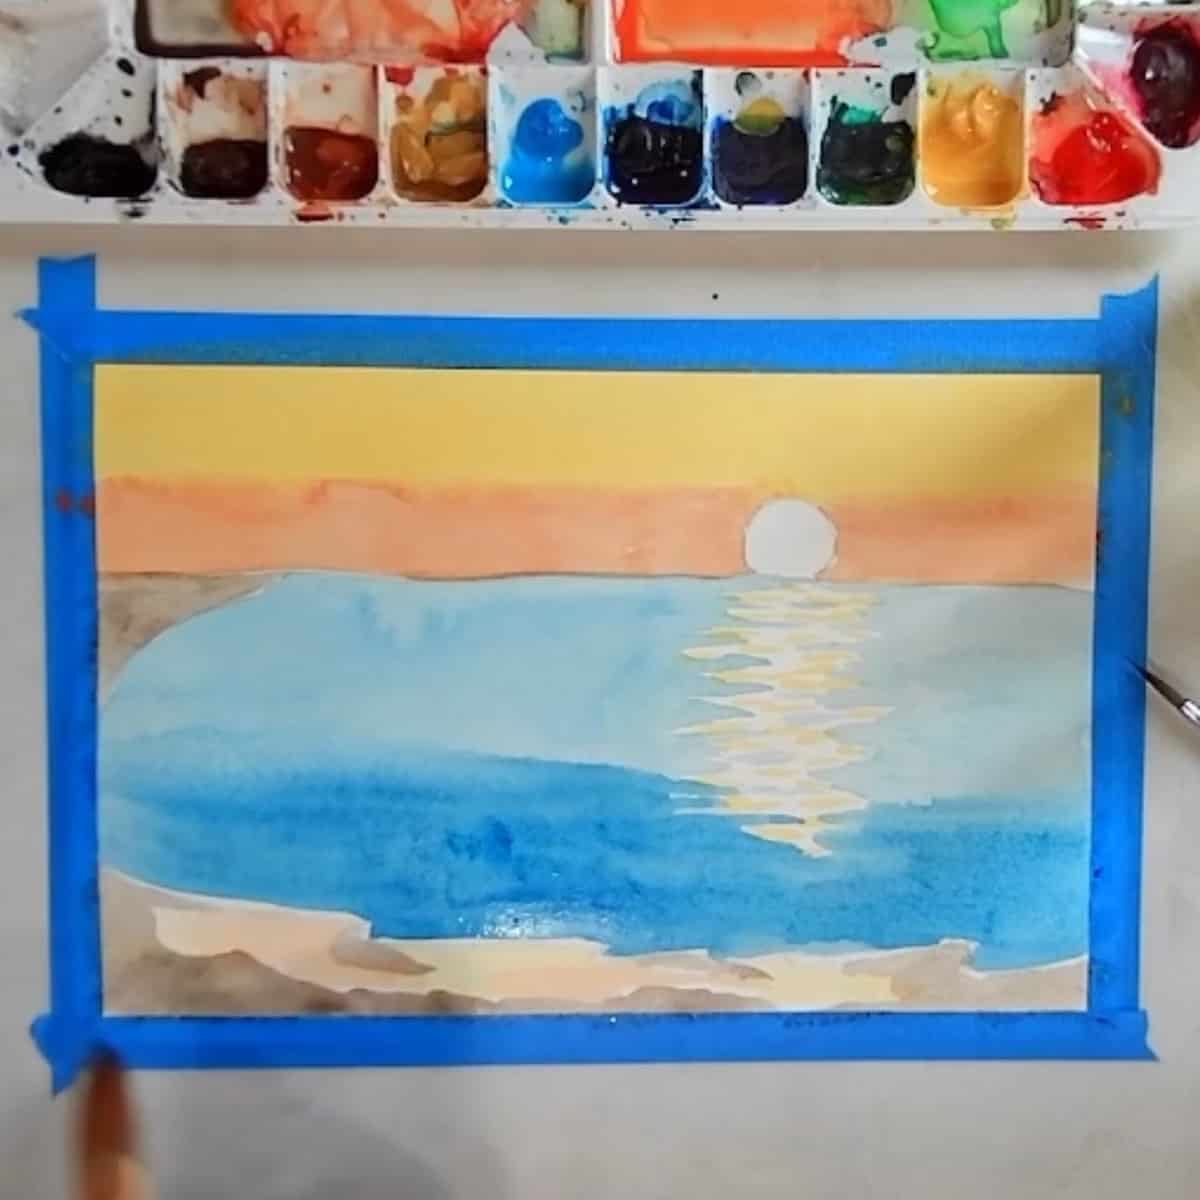 An artist painting in the beach of a watercolor beach sunset painting.